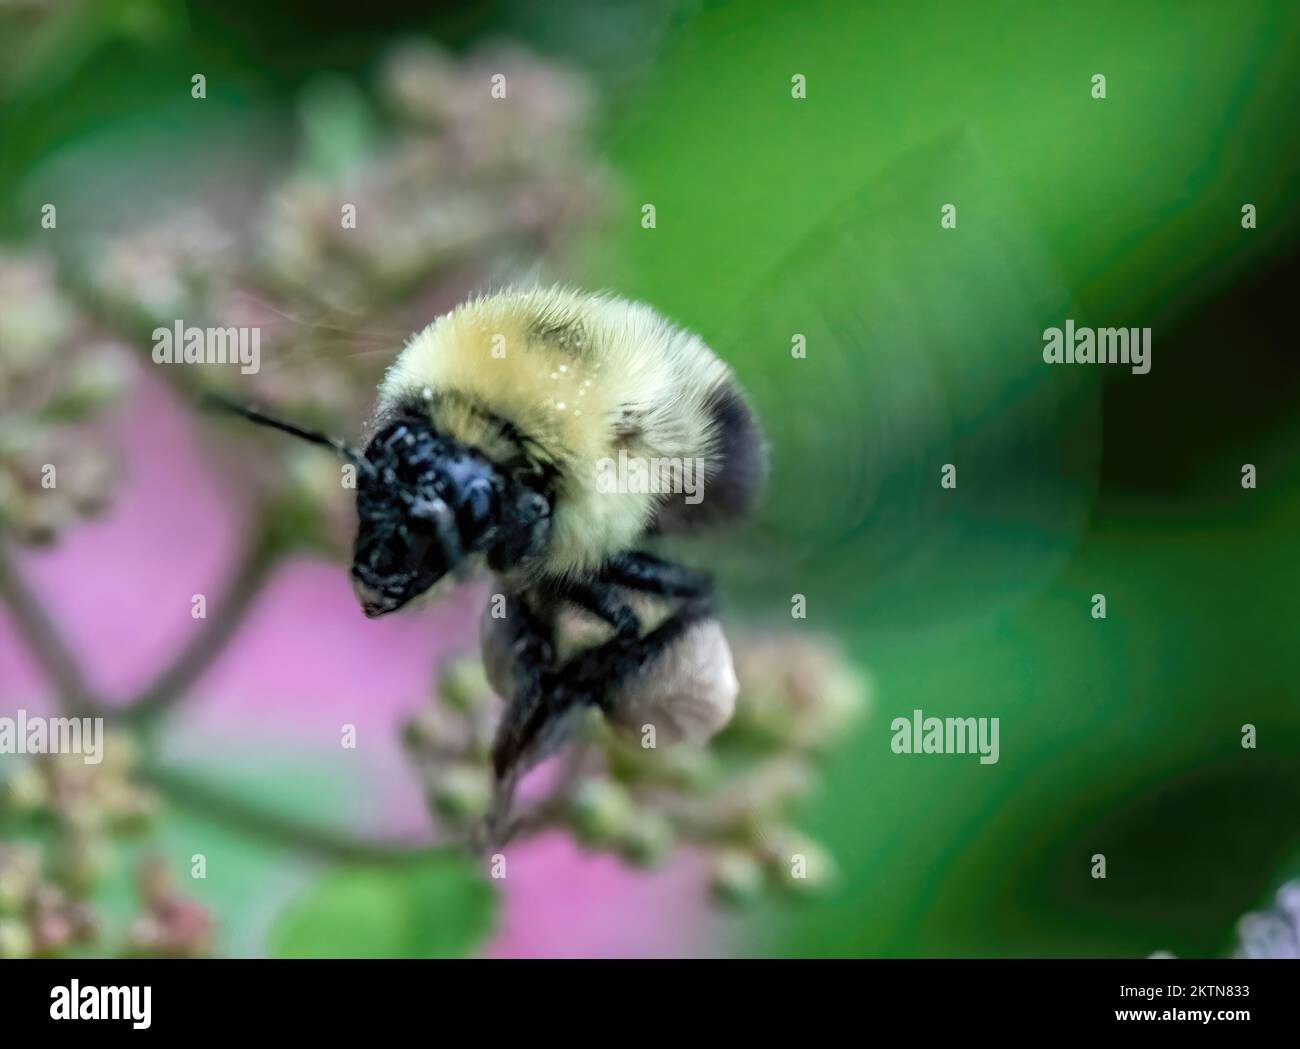 Bumblebee in flight with pollen sacks on his legs flying among a spirea plant on a summer day in Taylors Falls, Minnesota USA. Stock Photo